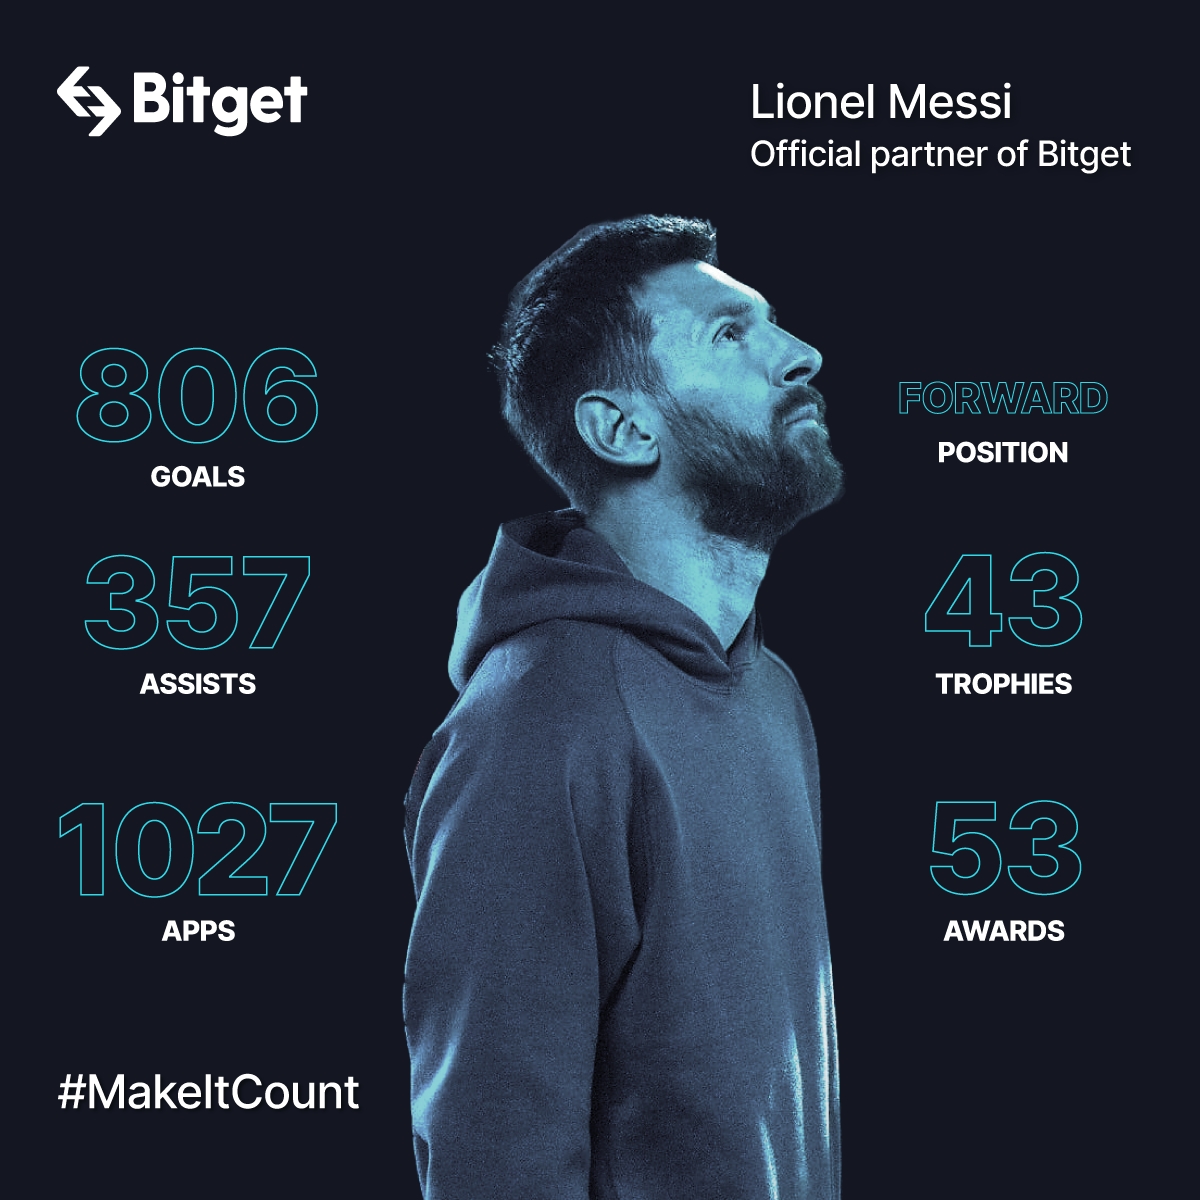 ⚽ From Paris to Miami, Messi shakes up the world.

💪 Regardless of the choices he makes, Messi embodies perseverance and reminds us to make every step count.

✨ Each moment presents an opportunity to make a profound impact.

⏳ #Messi𓃵  is truly a testament to #MakeItCount.